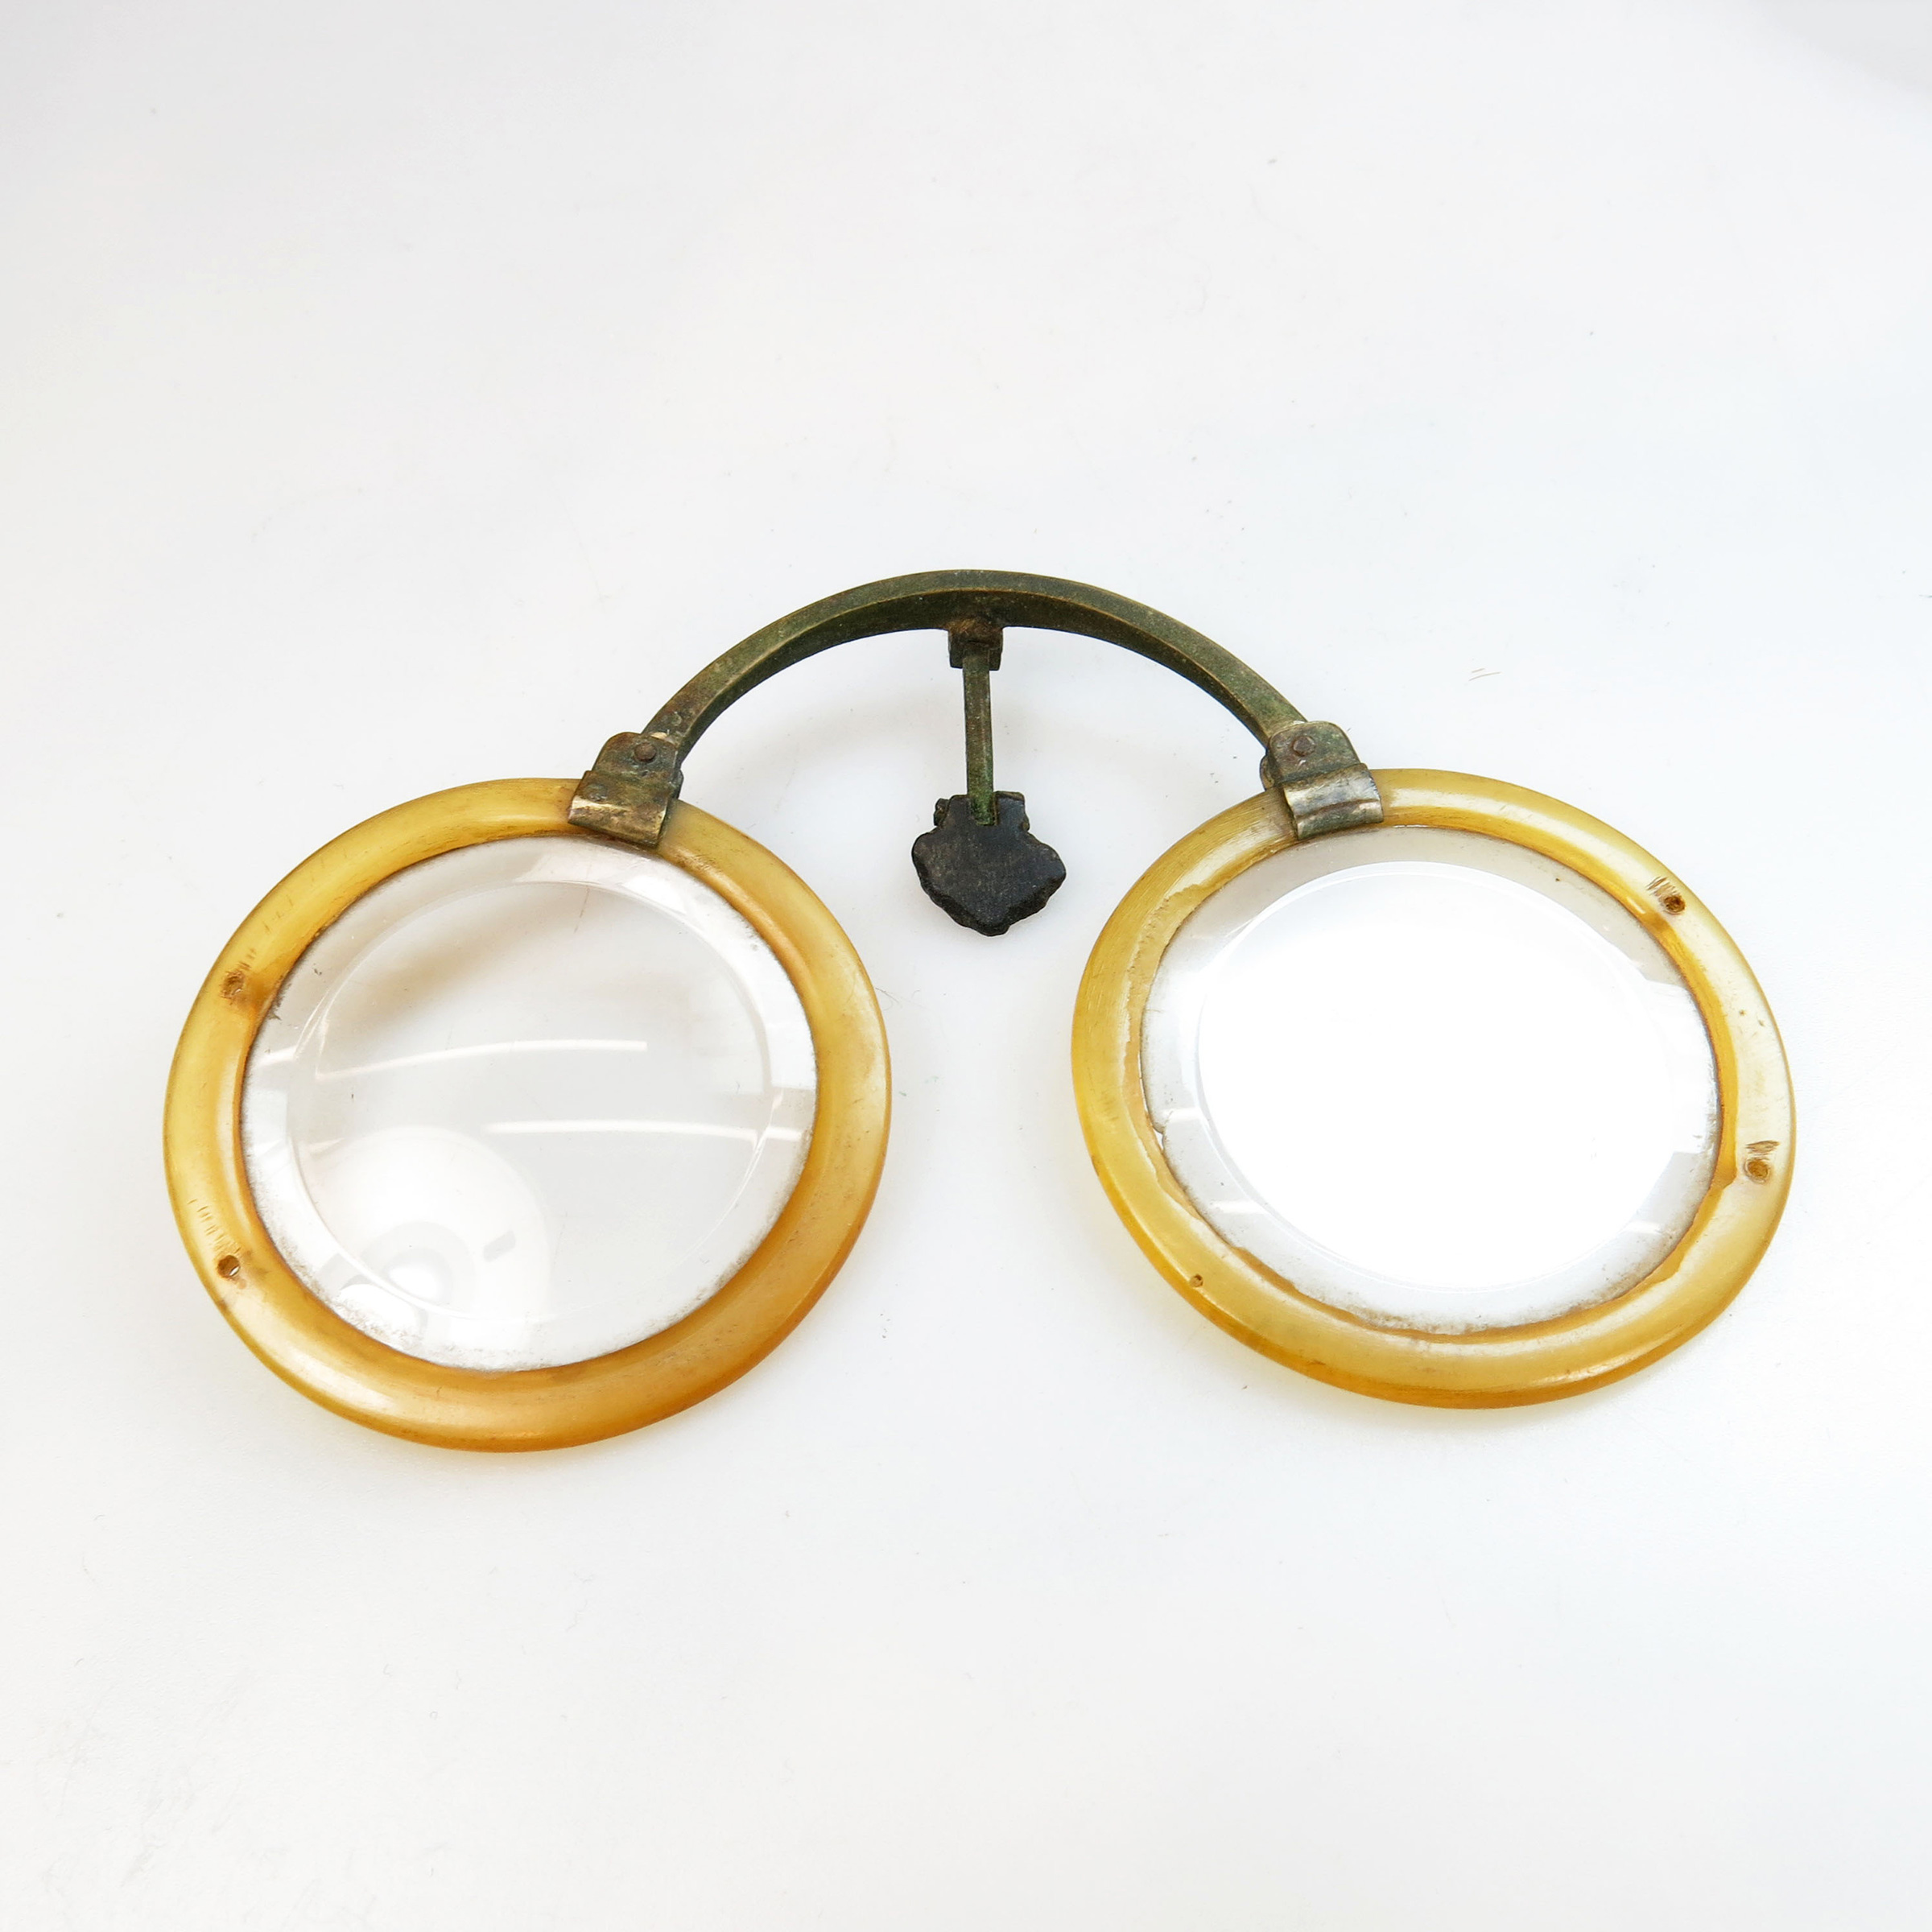 Pair Of 18th Century Chinese Baitong And Horn Spectacles